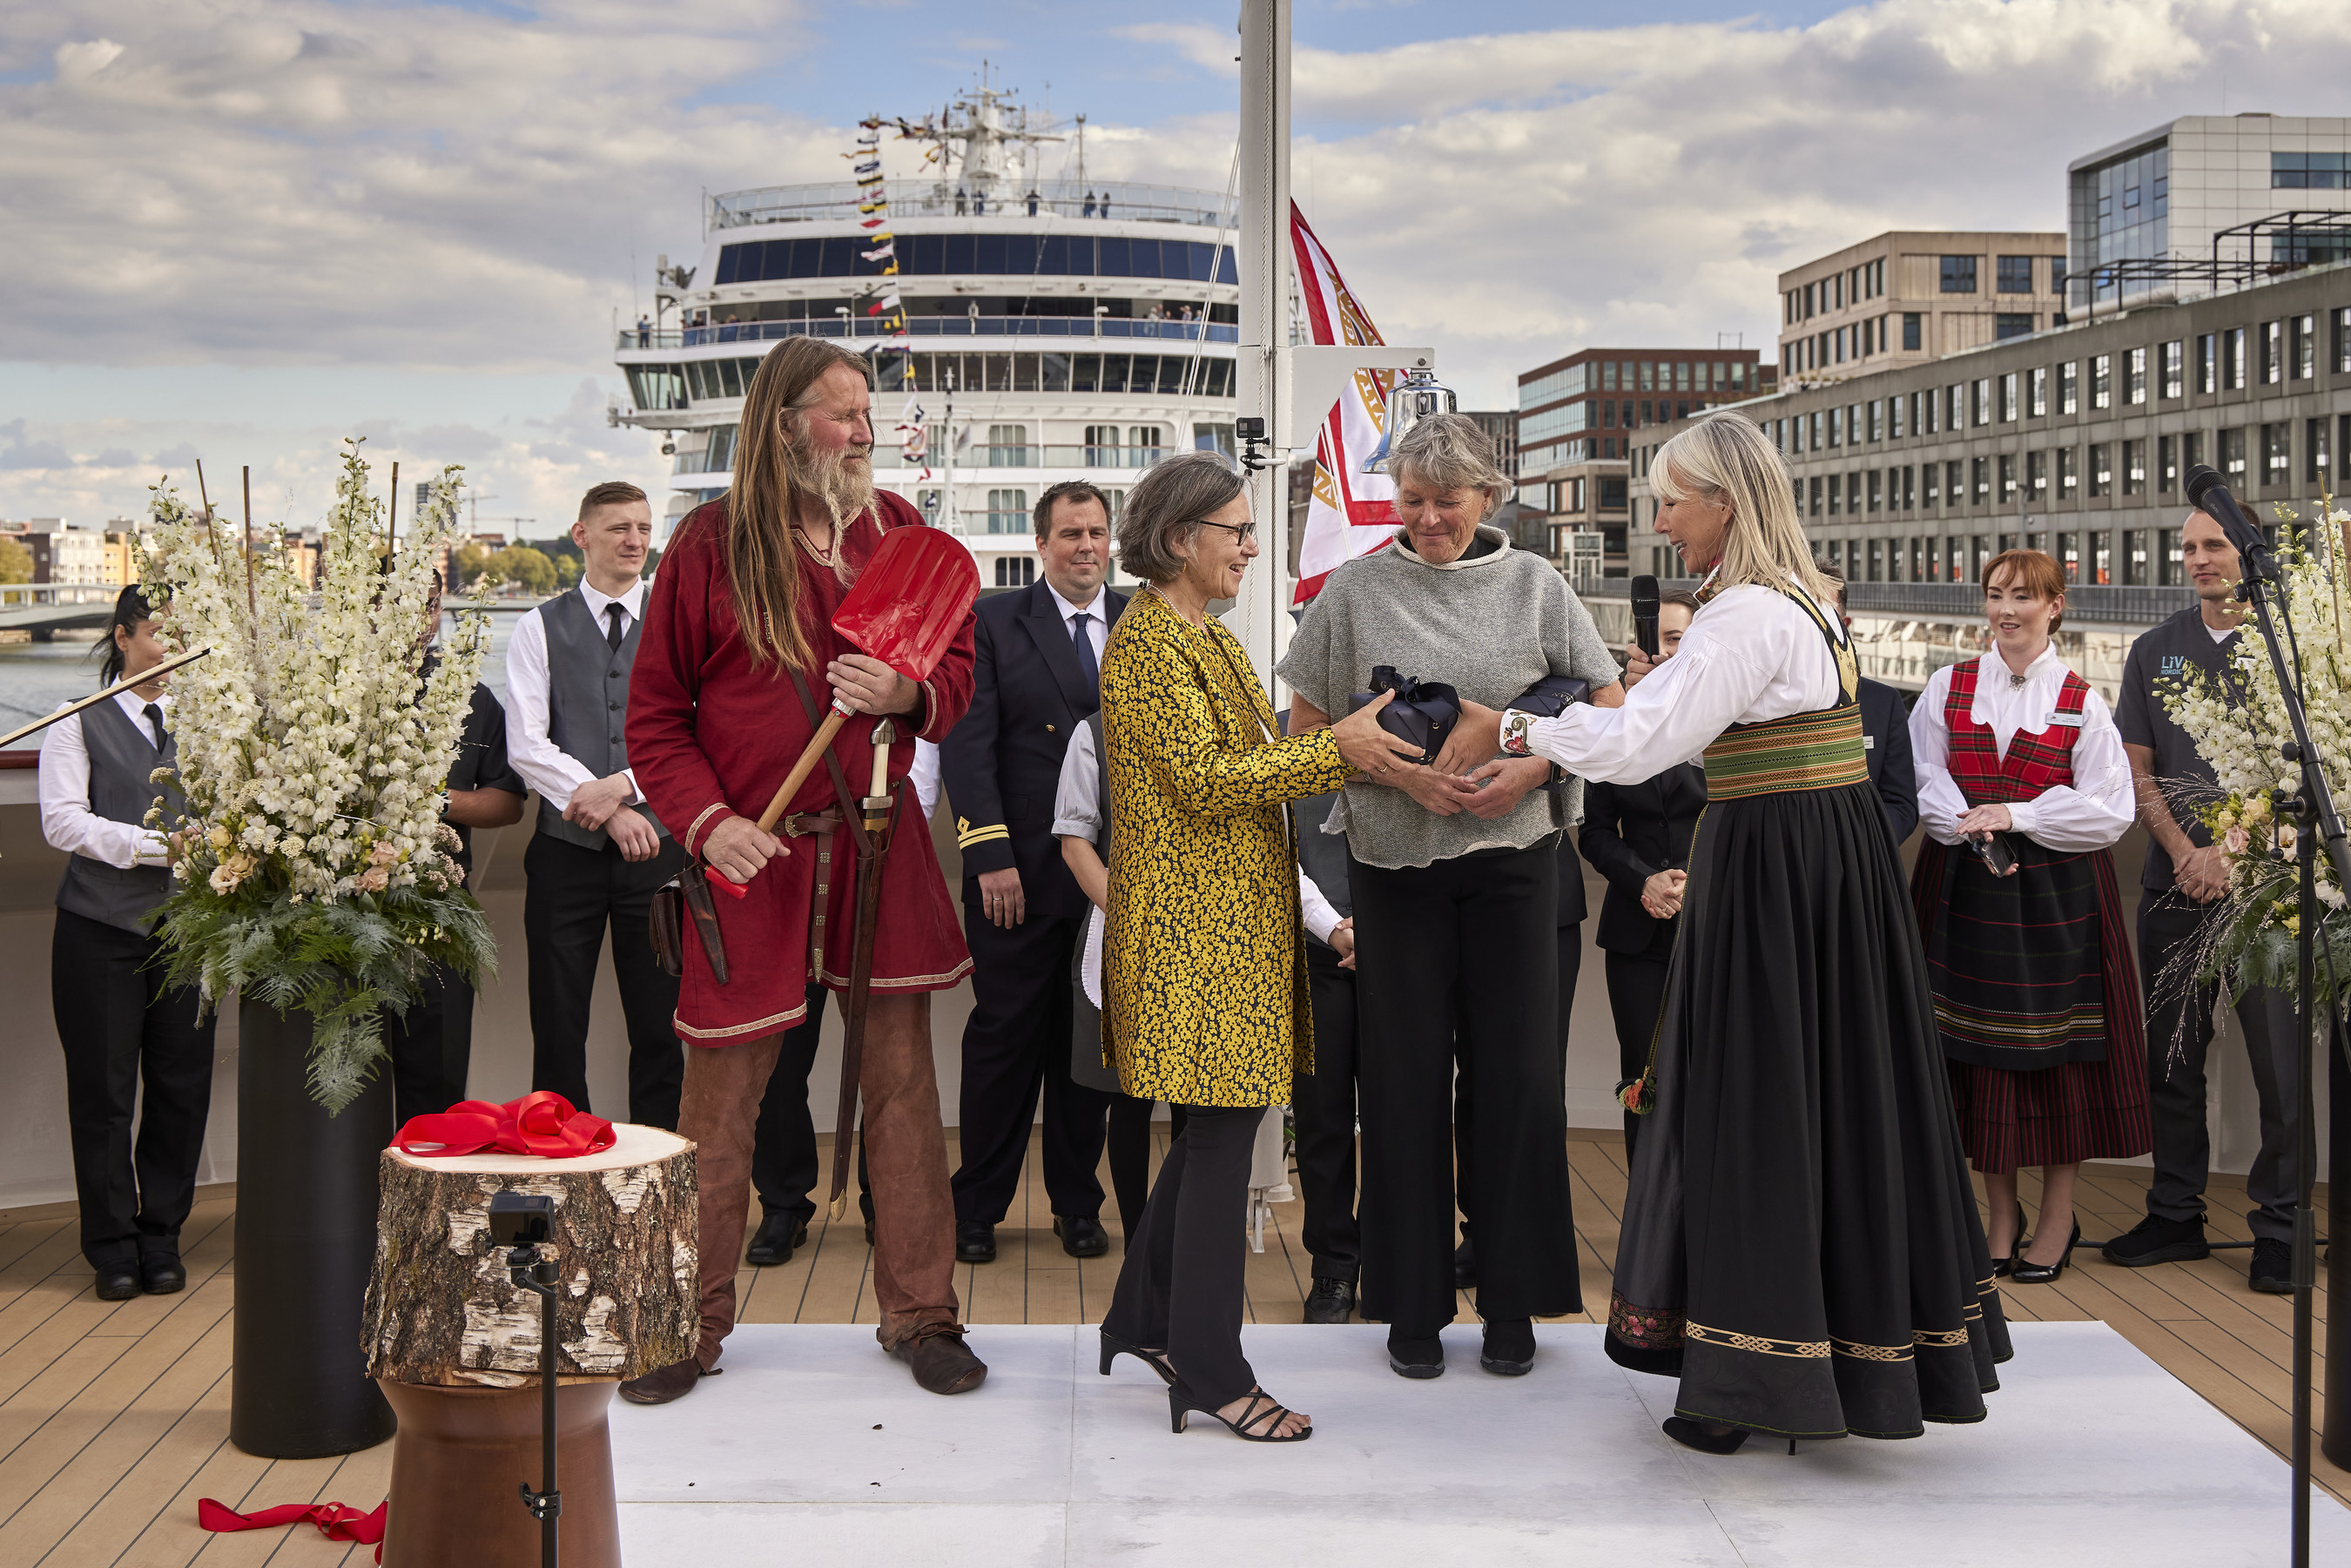 Viking Executive Vice President Karine Hagen (right) presents gifts to Liv Arnesen (center) and Ann Bancroft (right), renowned explorers and godmothers of the Viking Octantis and the Viking Polaris, respectively  (Image at LateCruiseNews.com - October 2022)